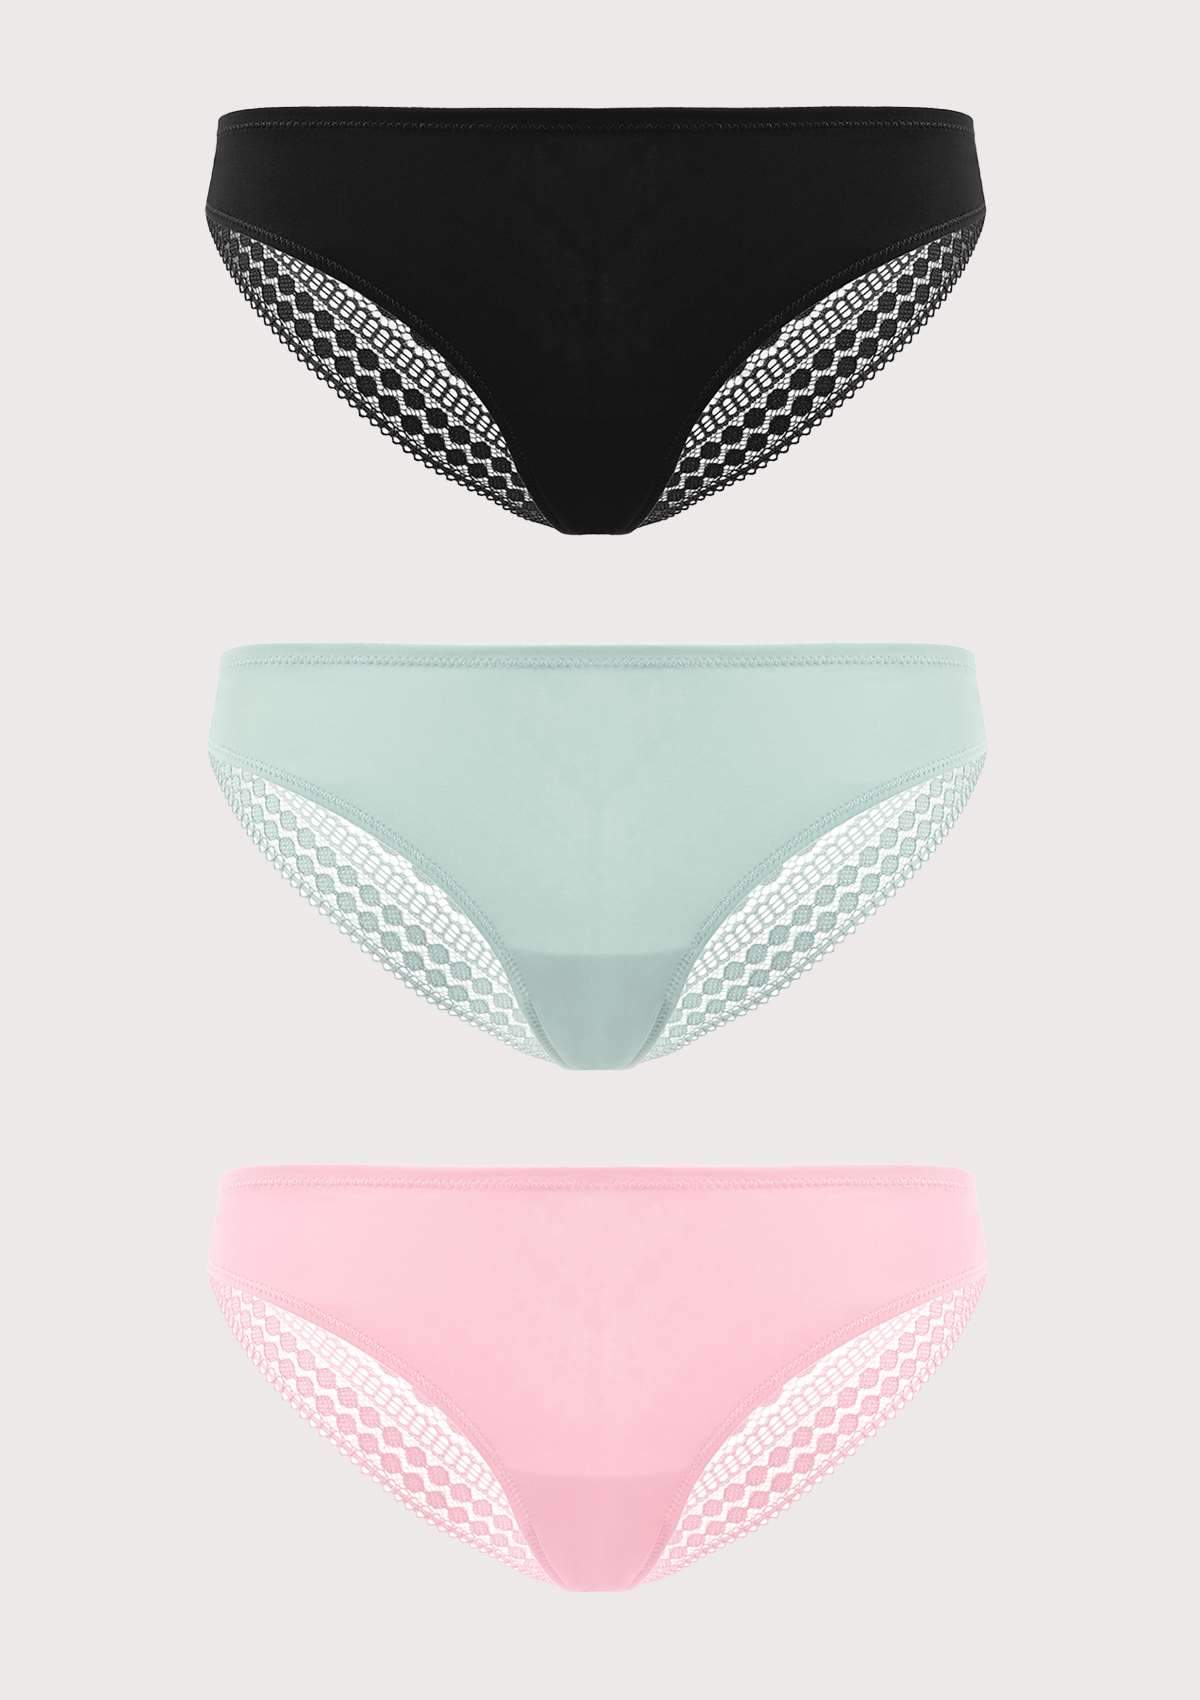 HSIA Polka Dot Super Soft Lace Back Cheeky Panties 3 Pack - S / Black+Frosty Green+Pink